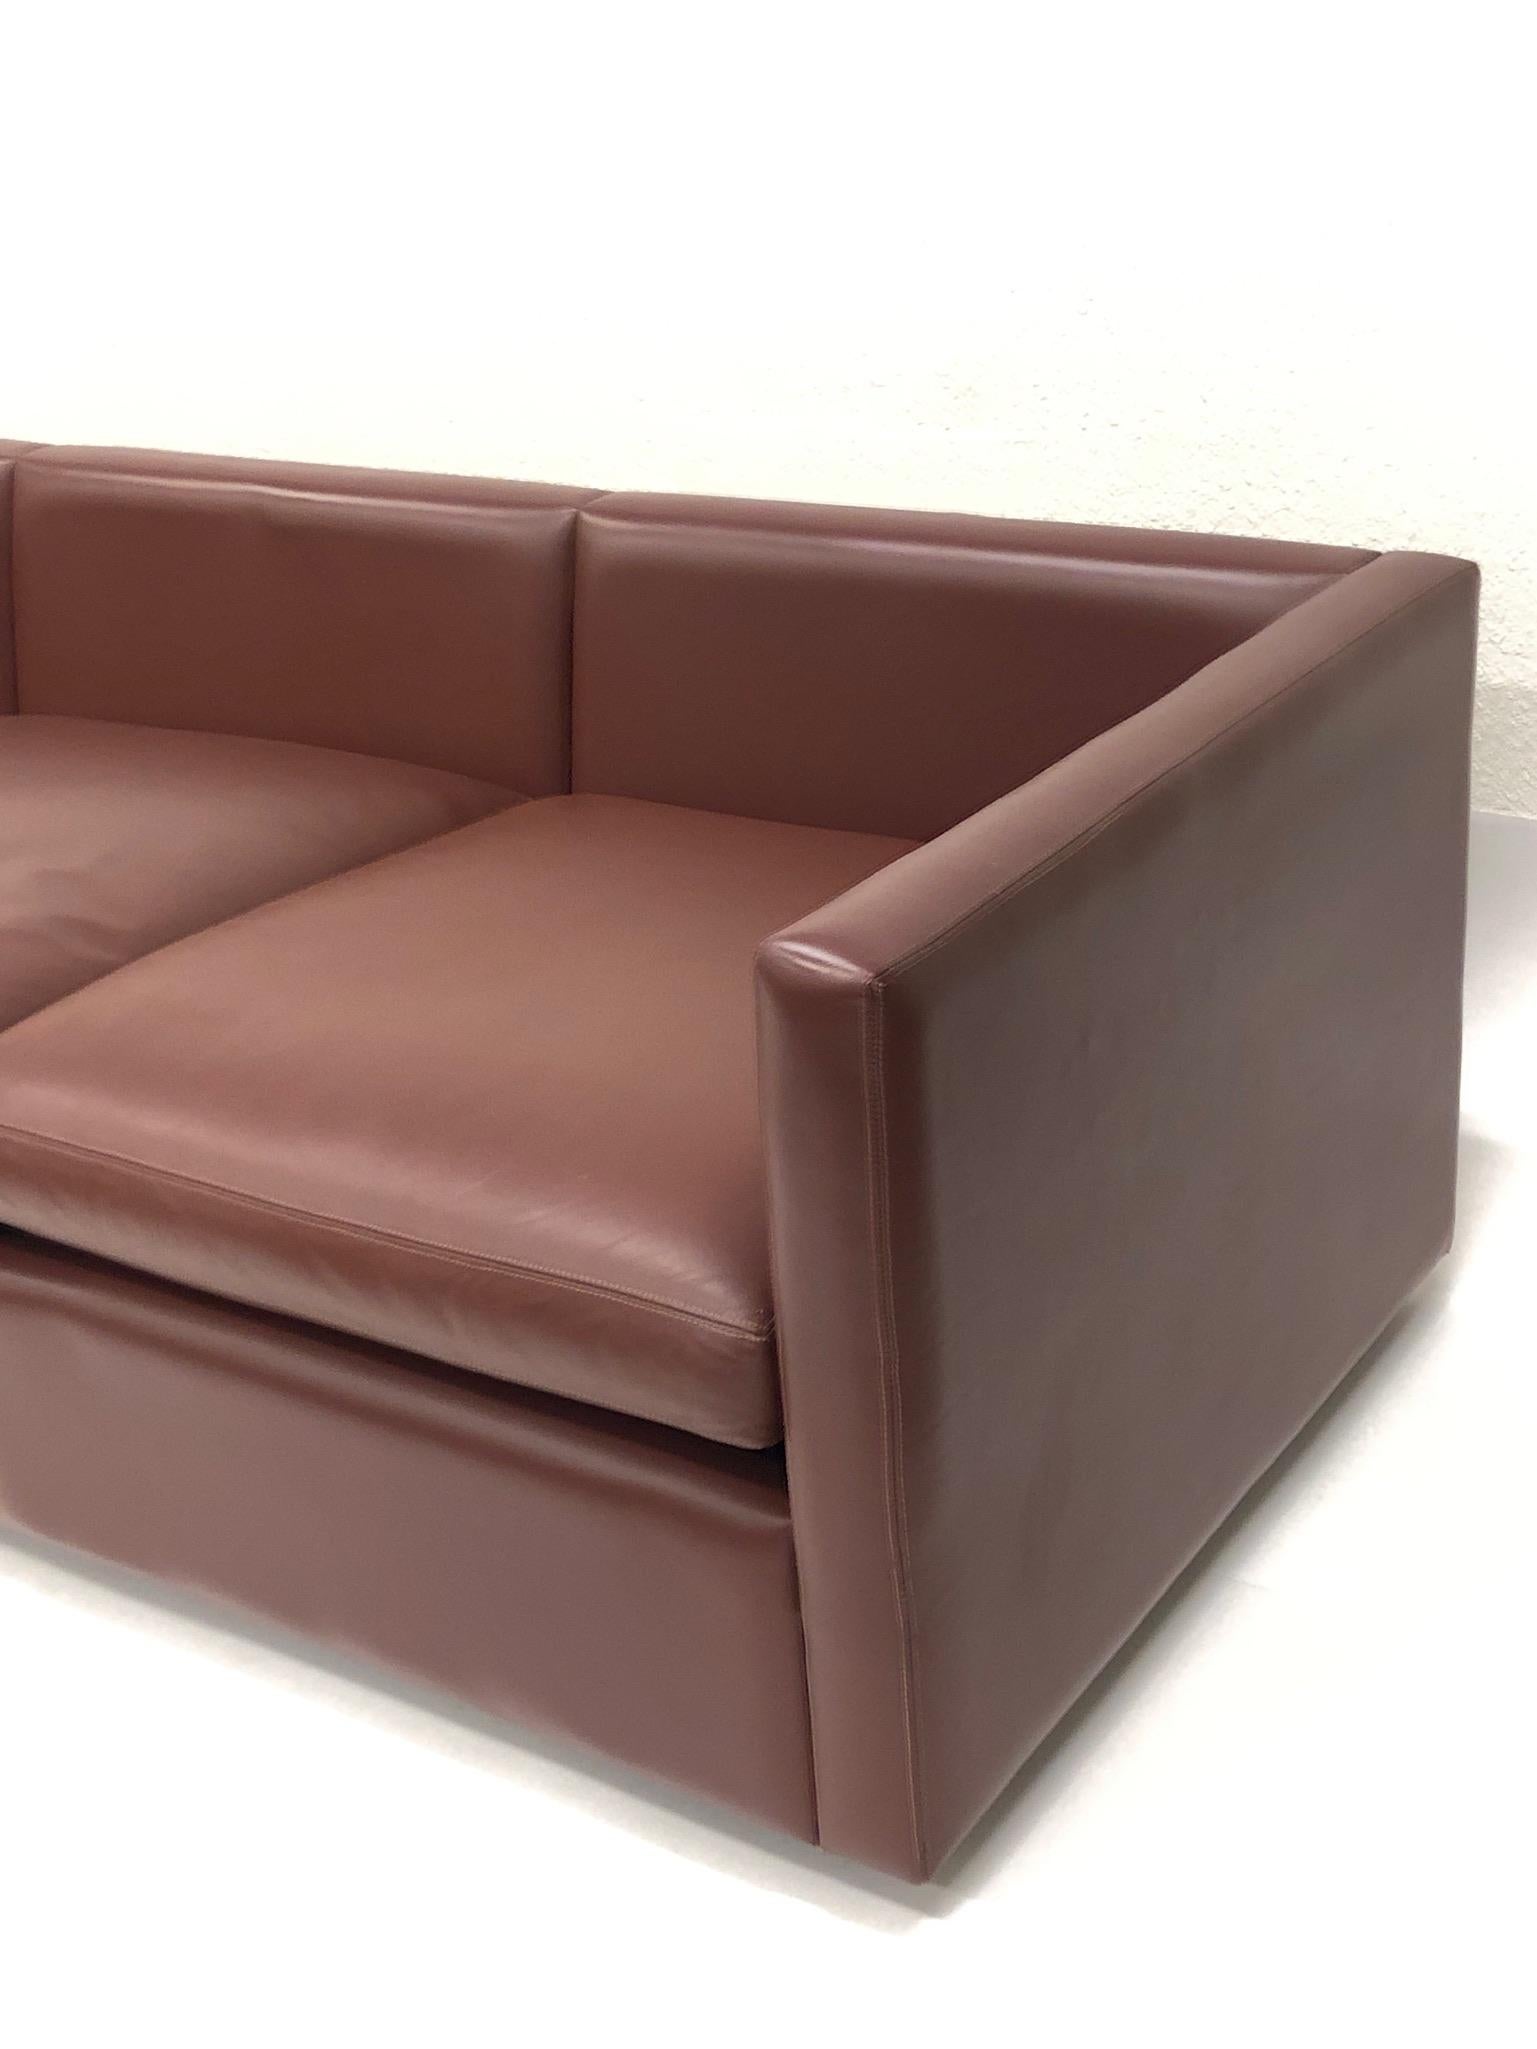 Late 20th Century Burgundy Leather Sofa by Charles Pfister for Knoll